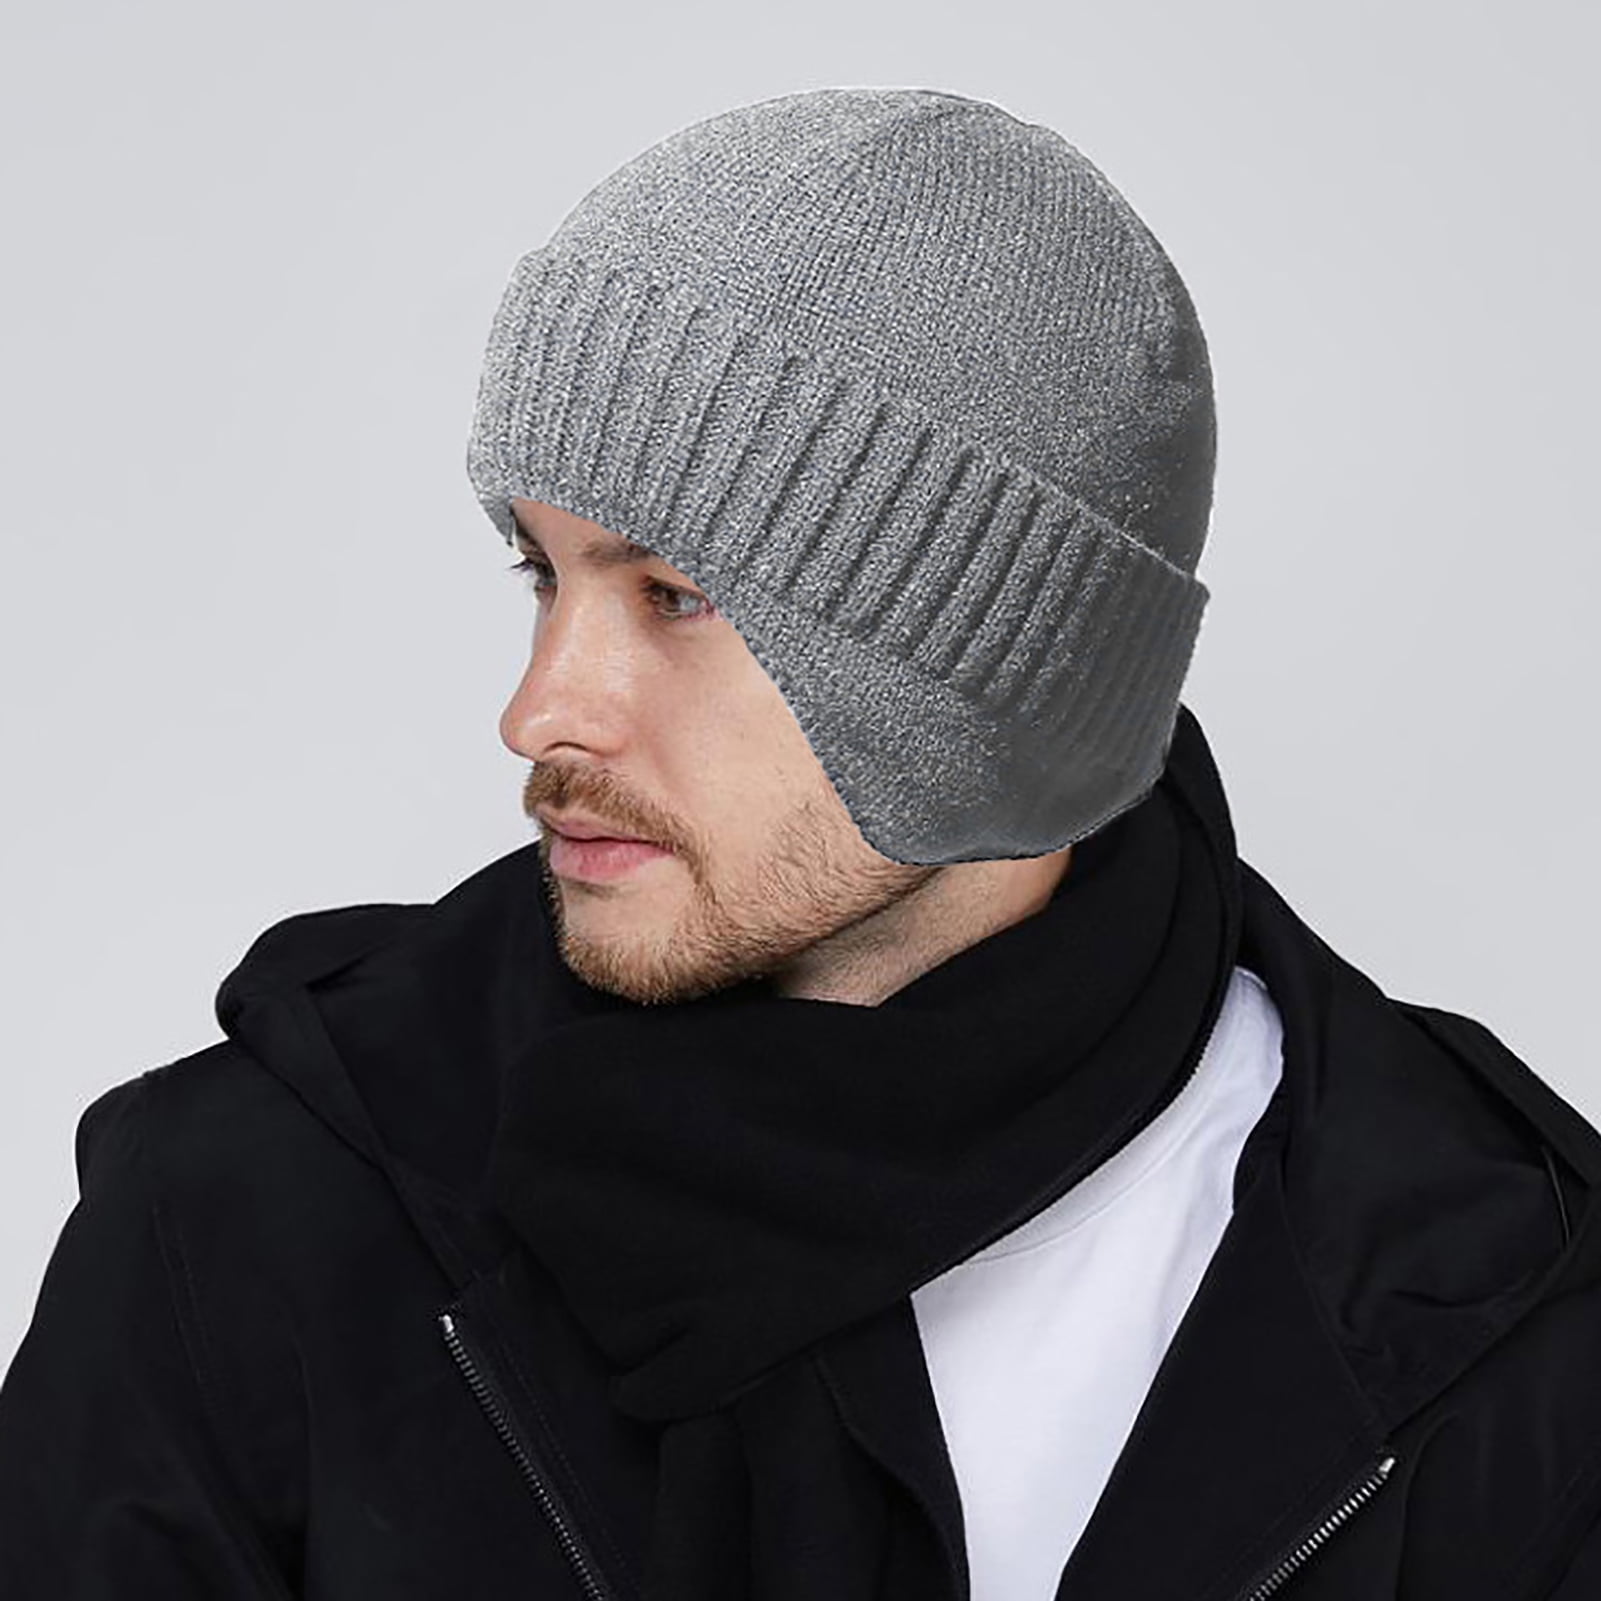 Details about   WINTER KNIT HAT FLEECE LINED WITH EARFLAP UNISEX GREY 